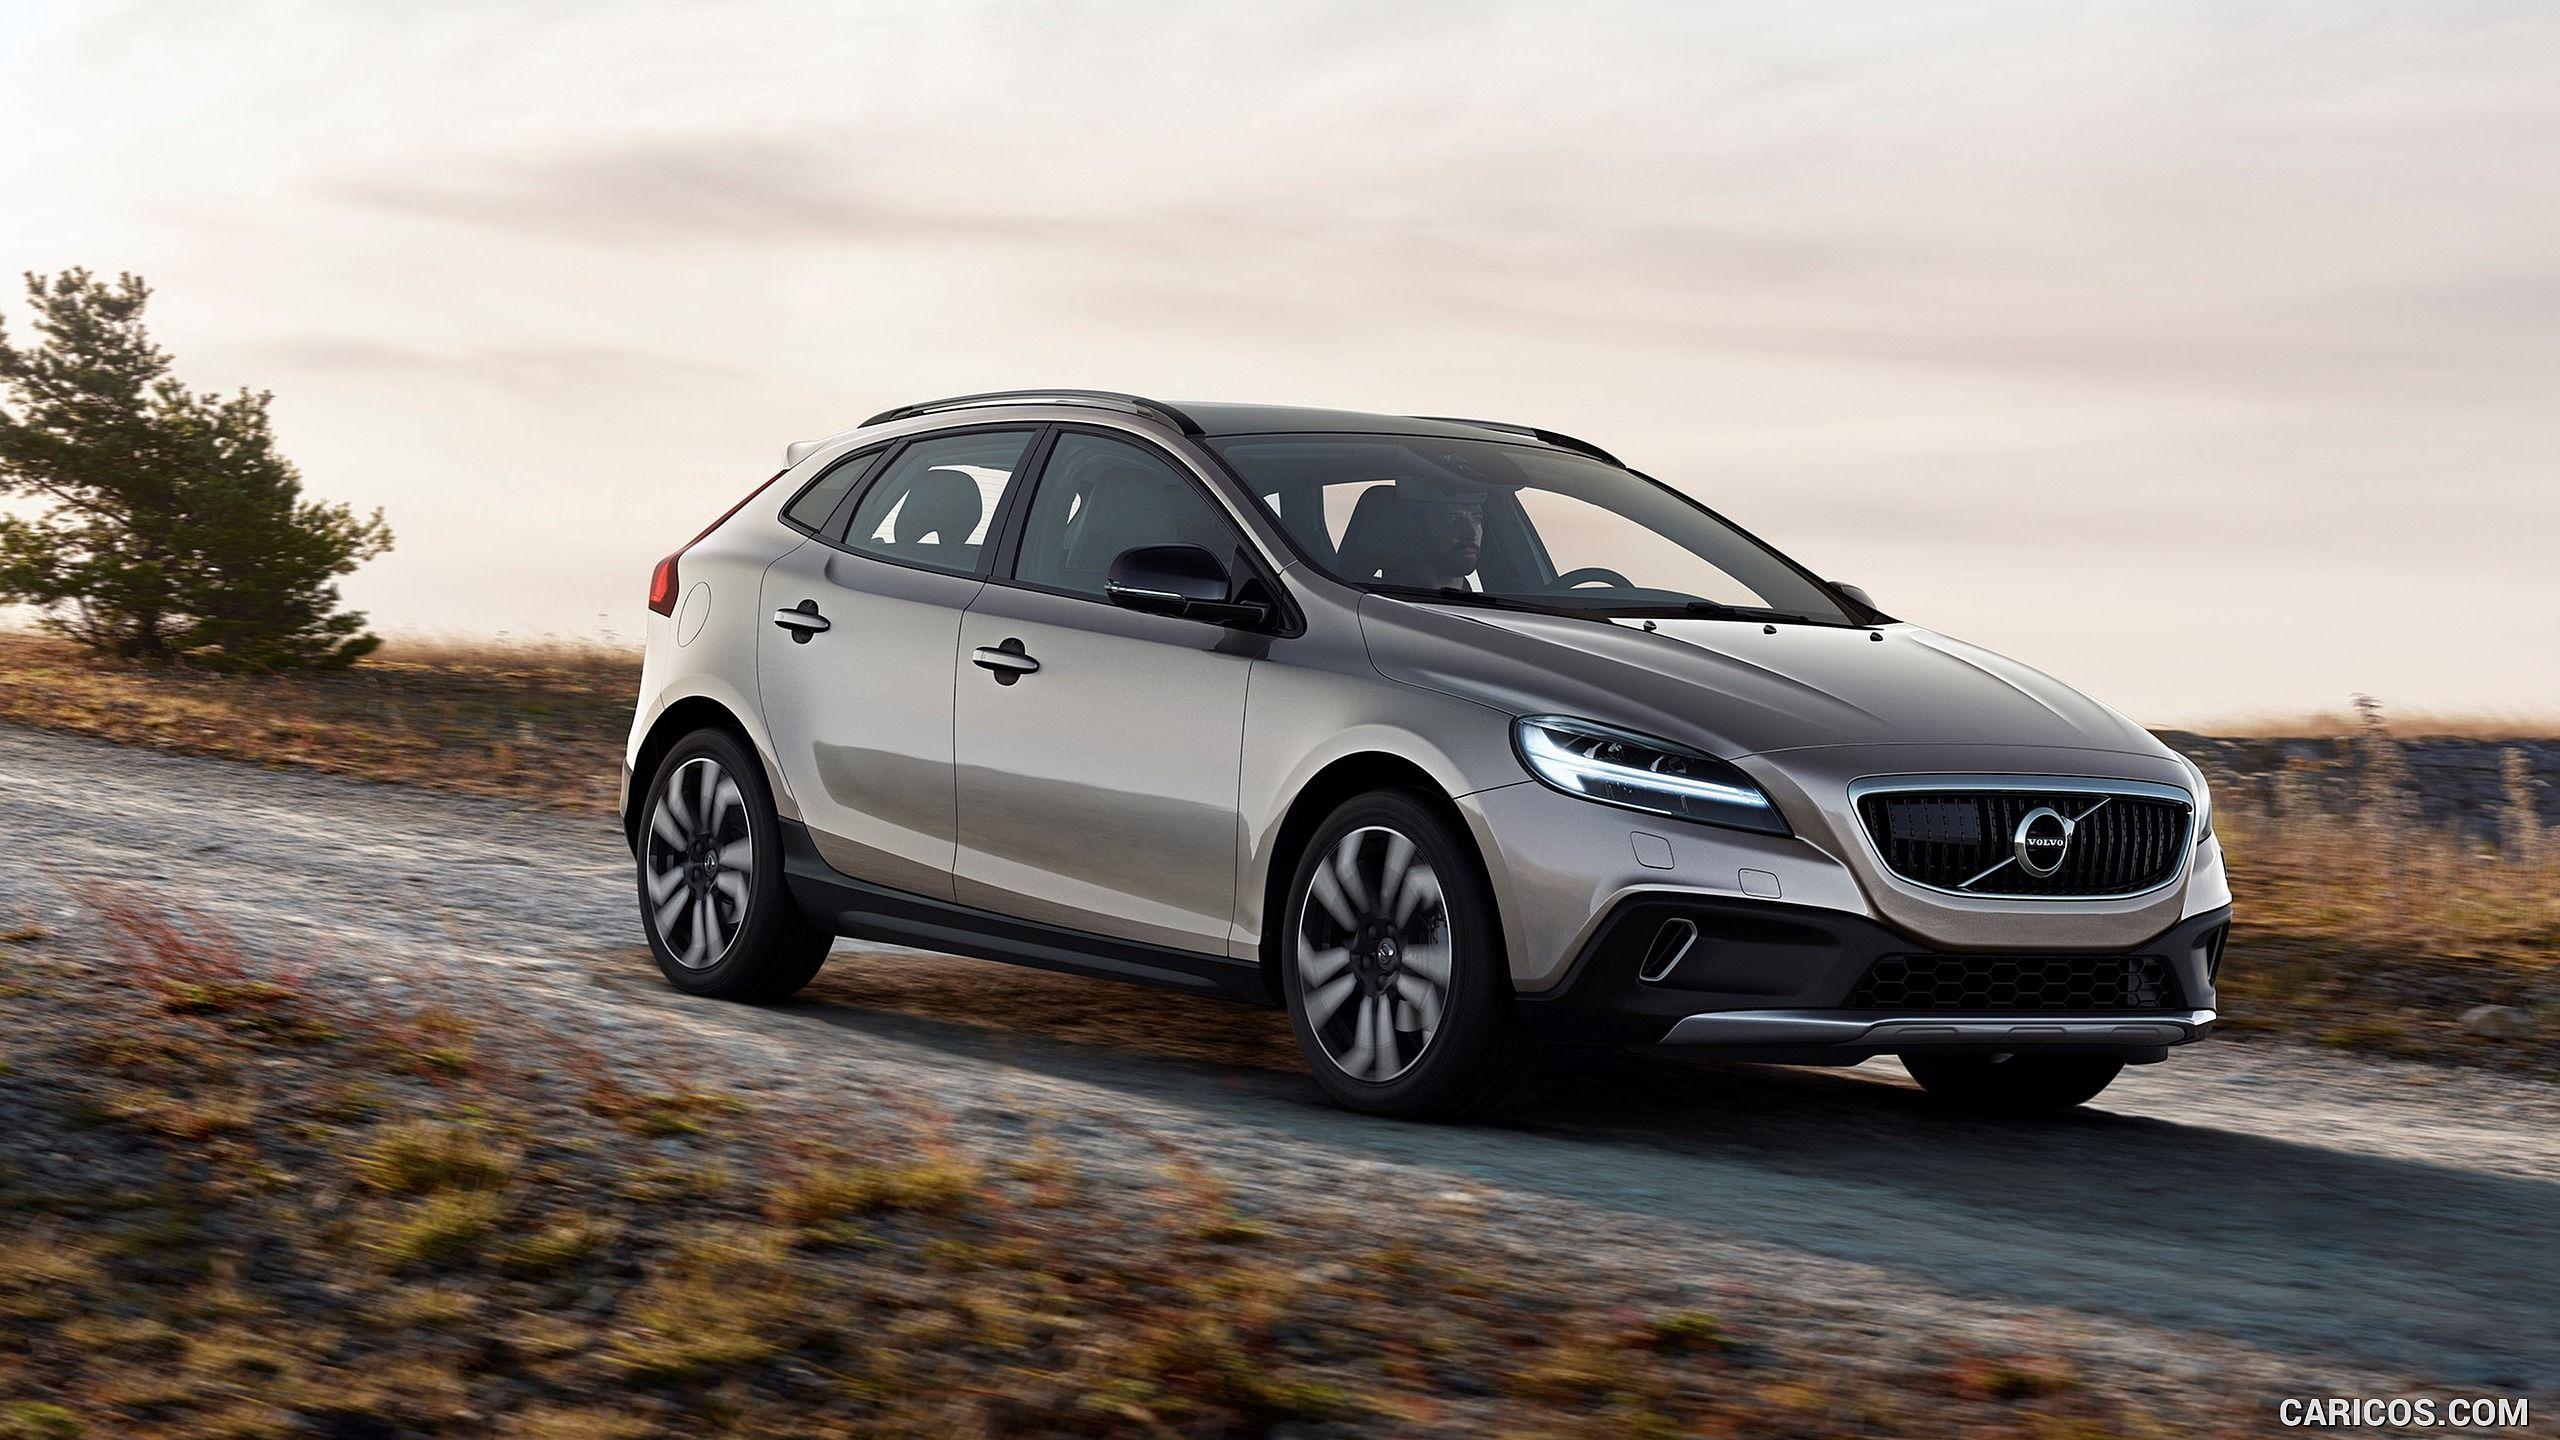 Volvo V40 Cross Country Wallpaper. Things to fill the Garage